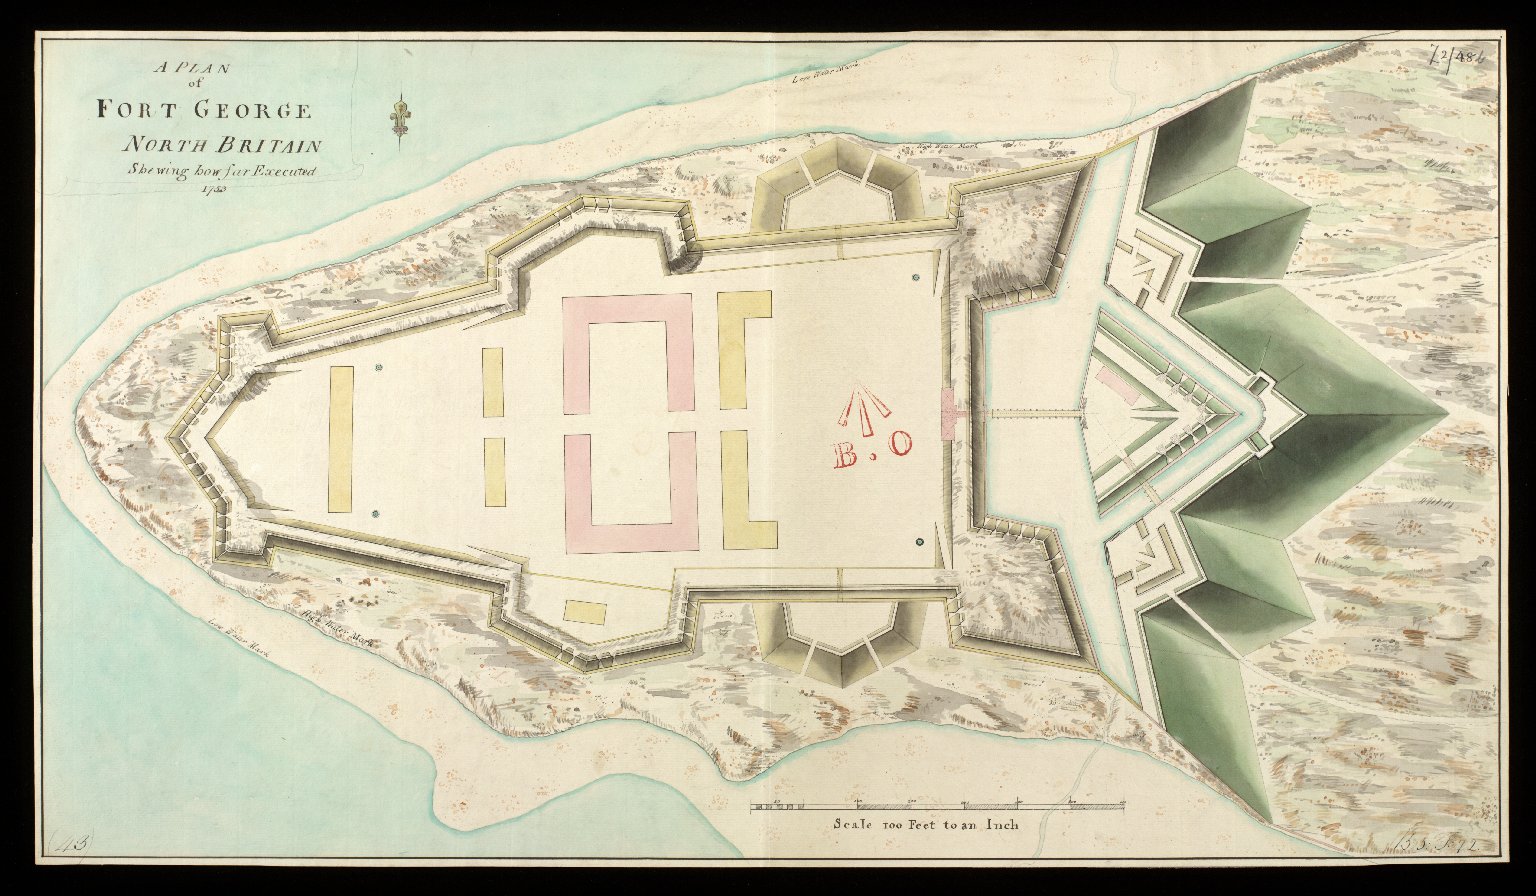 A Plan of Fort George North Britain : shewing how far executed 1753 [copy] [1 of 1]